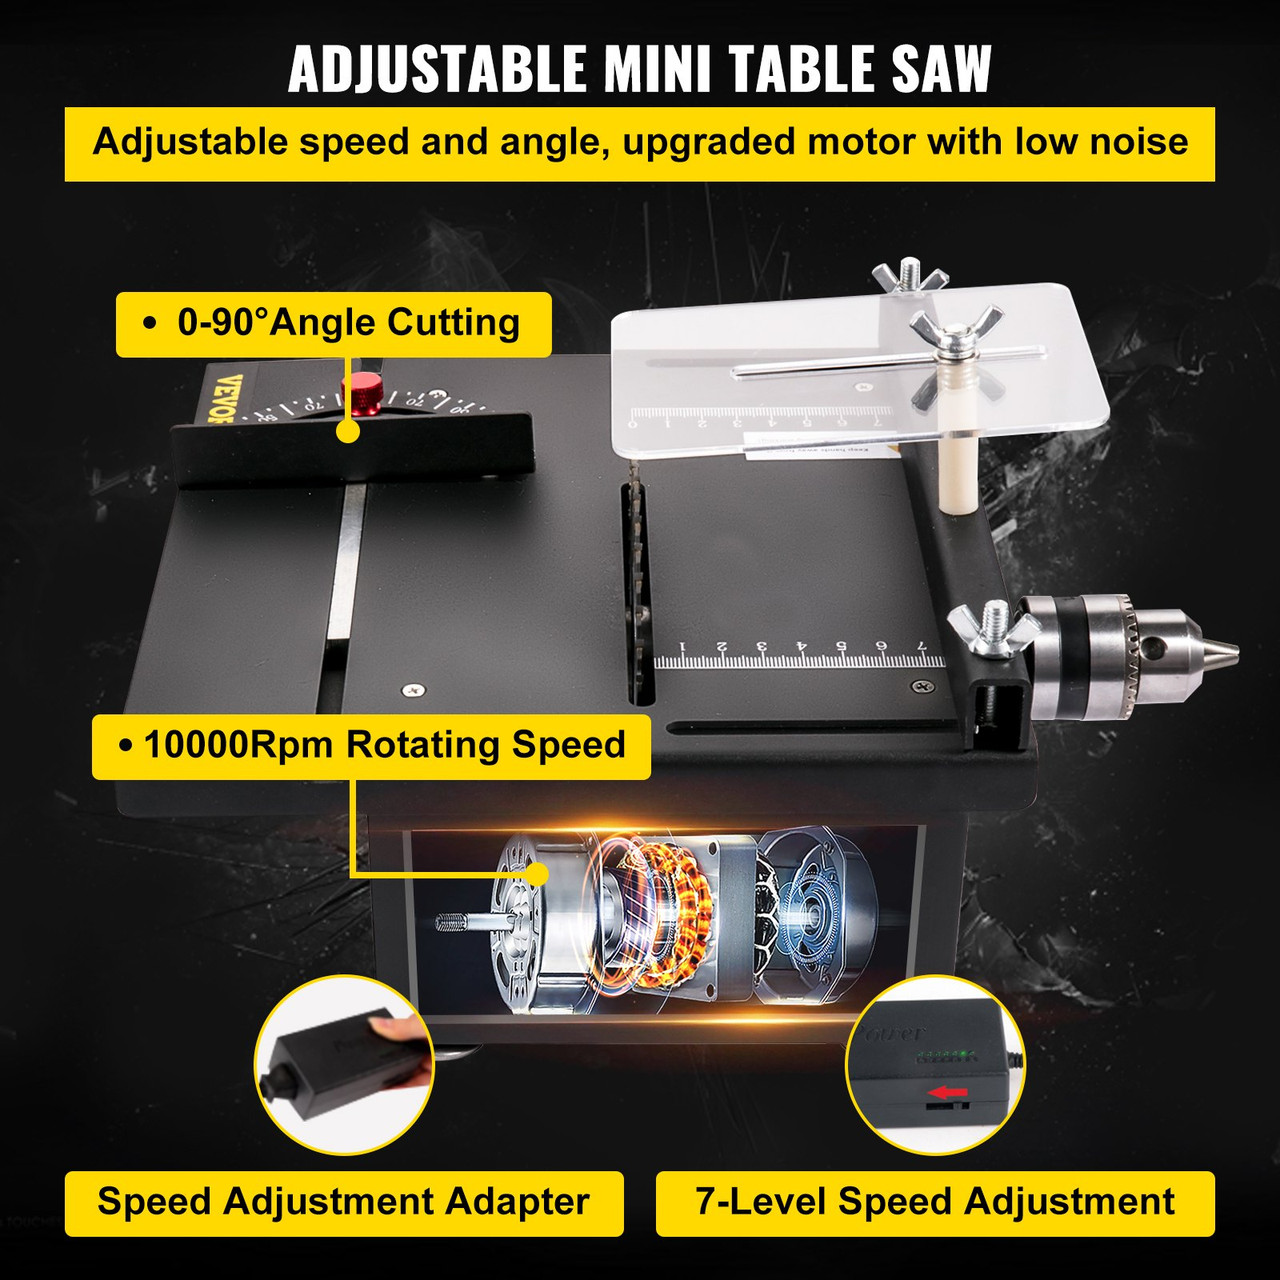 Mini Table Saw, 96W Hobby Table Saw for Woodworking, 0-90 Angle Cutting Portable DIY Saw, 7-Level Speed Adjustable Multifunctional Table Saws, 1.3in Cutting Depth Mini Precision Table Saw Item